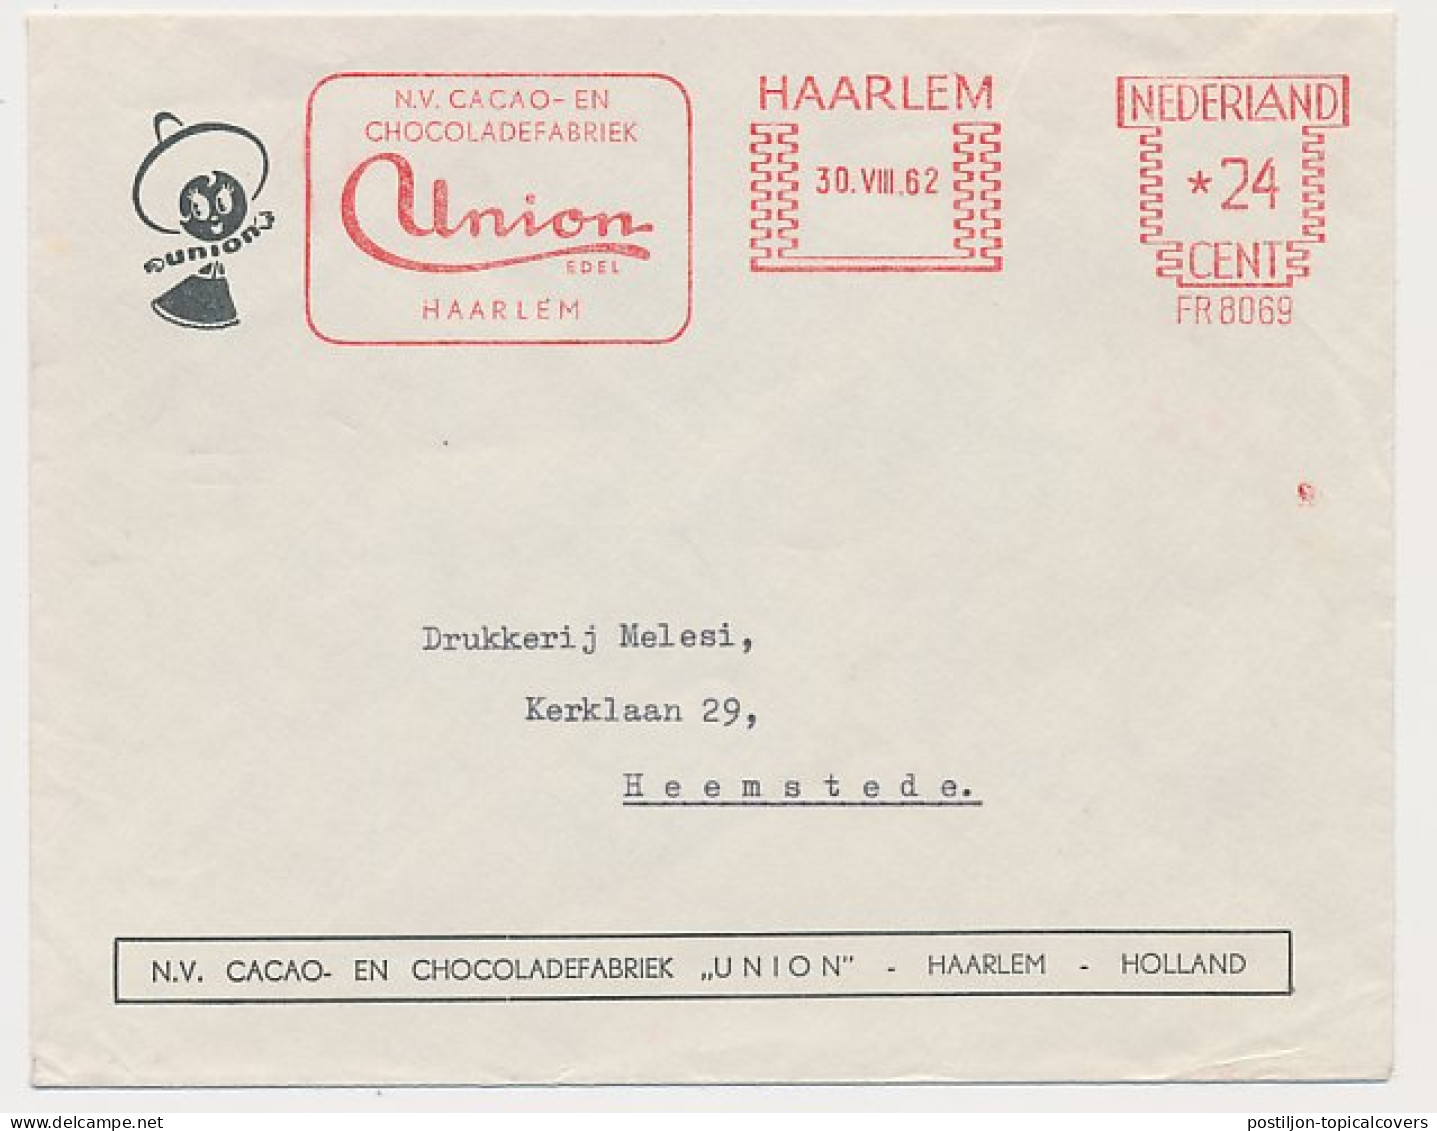 Meter Cover Netherlands 1962 Chocolate Factory Union - Haarlem - Food